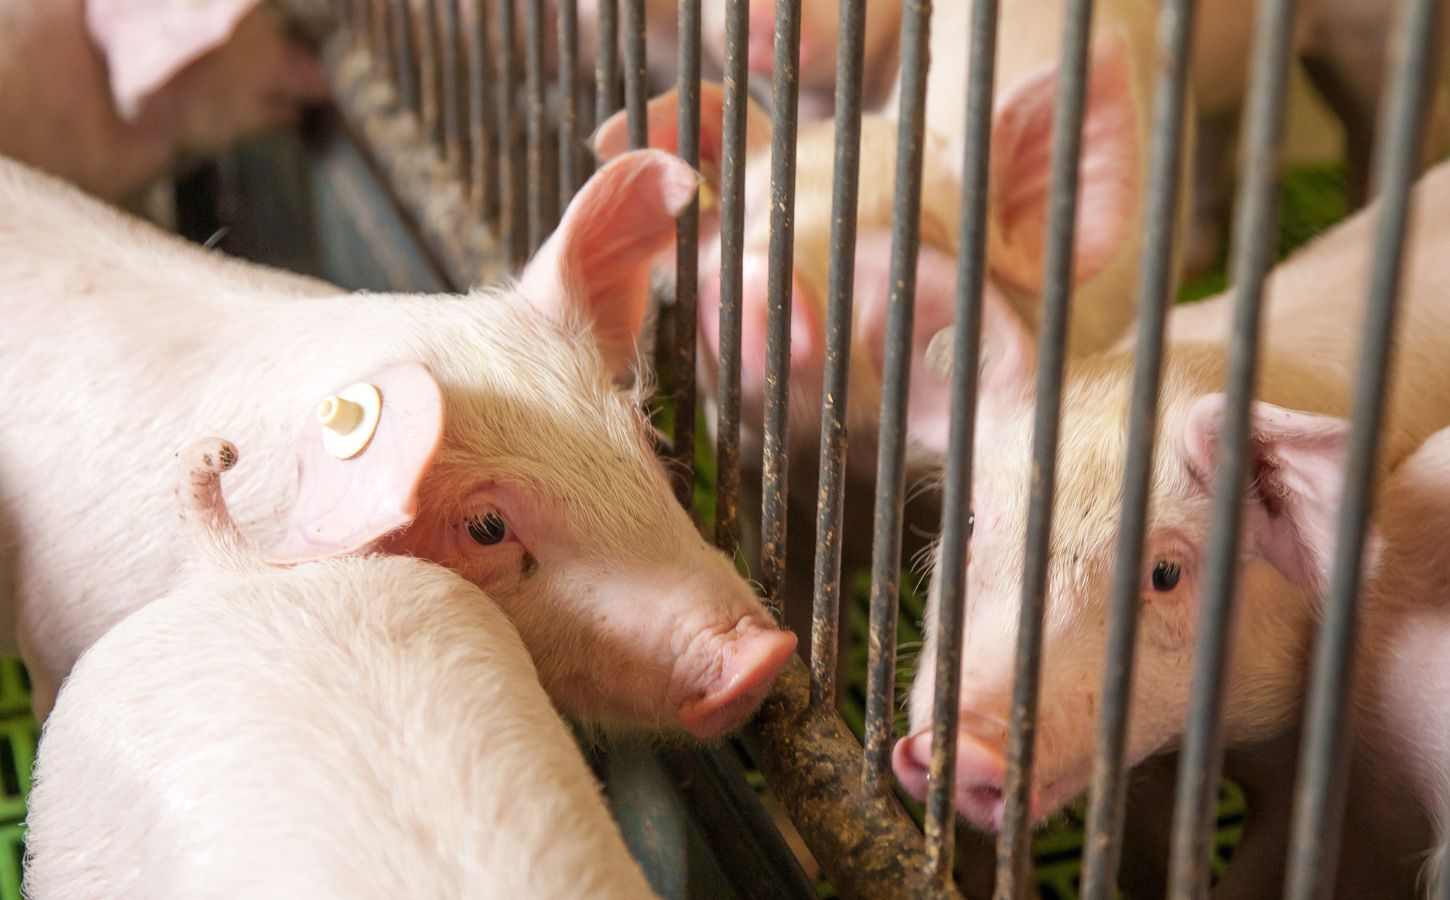 Pigs at a factory farm nearly touching noses through bars of a cage